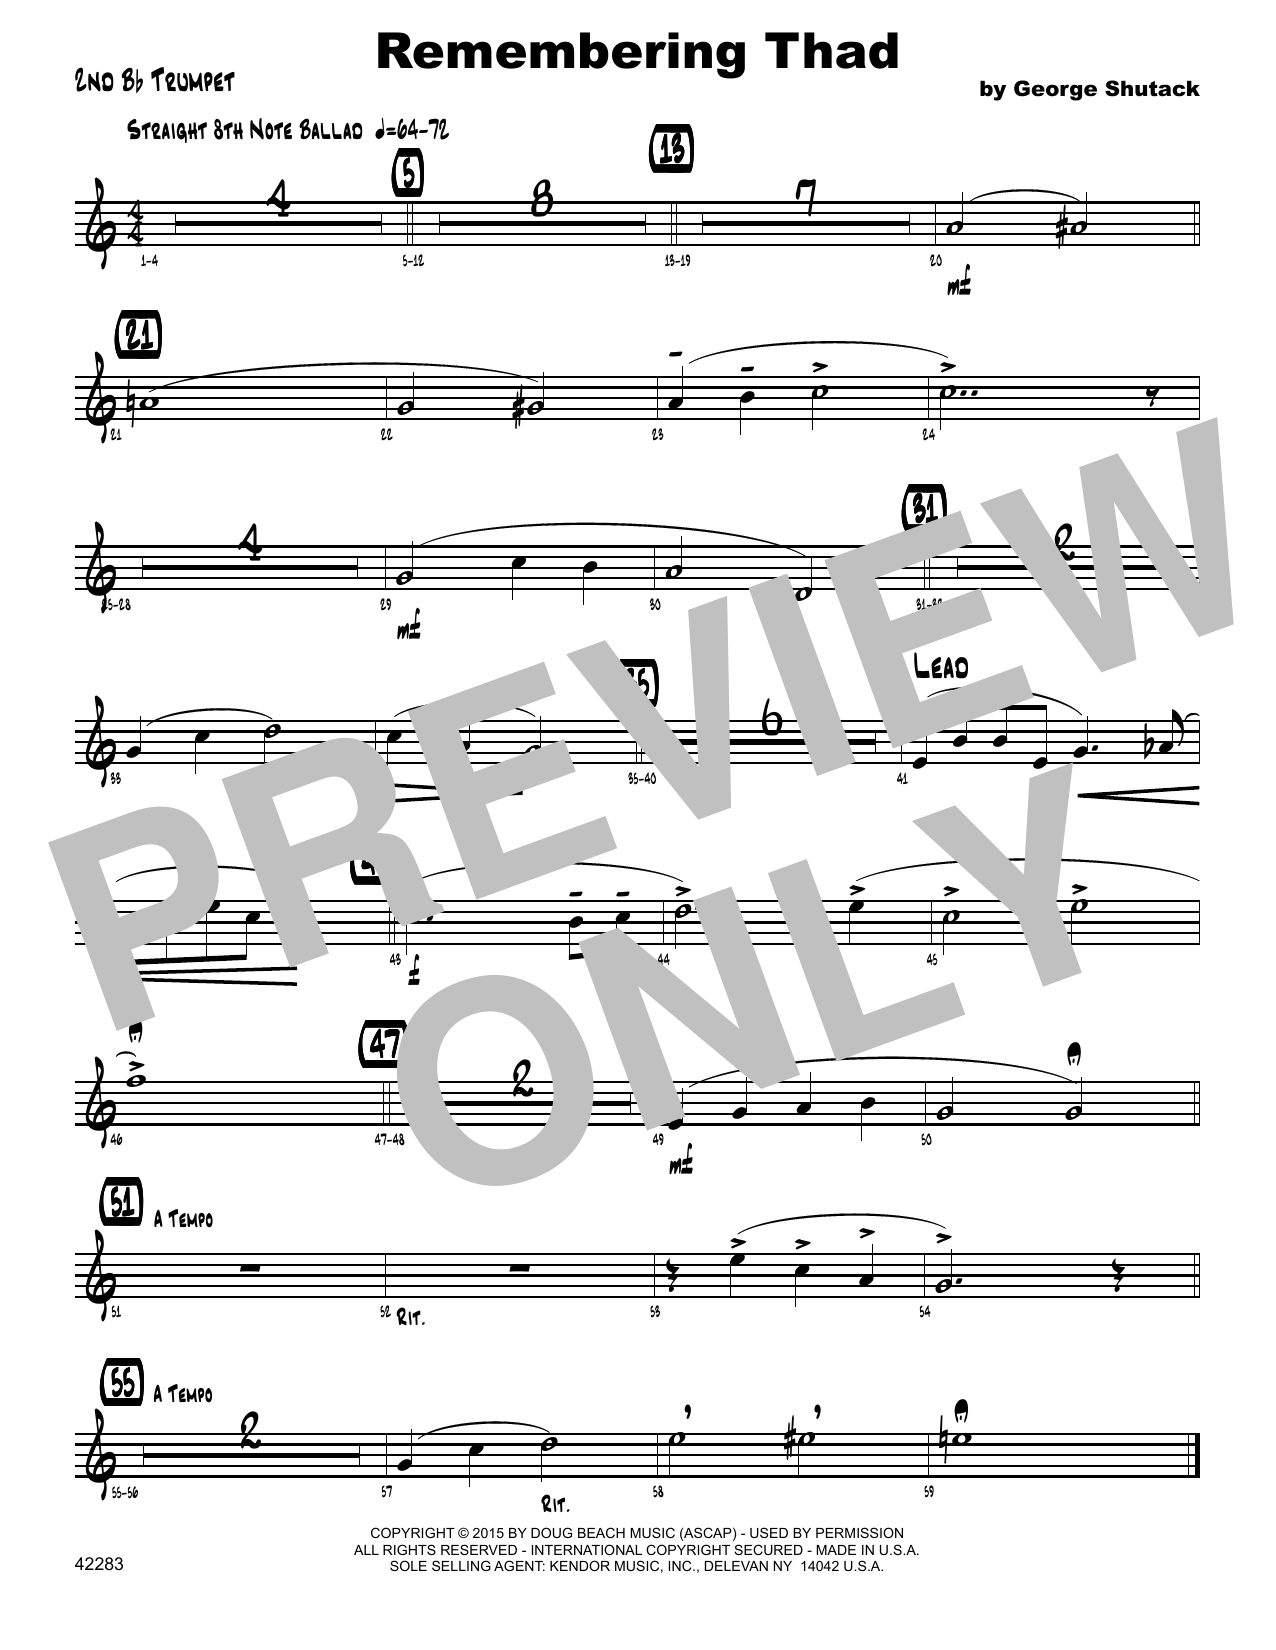 Download George Shutack Remembering Thad - 2nd Bb Trumpet Sheet Music